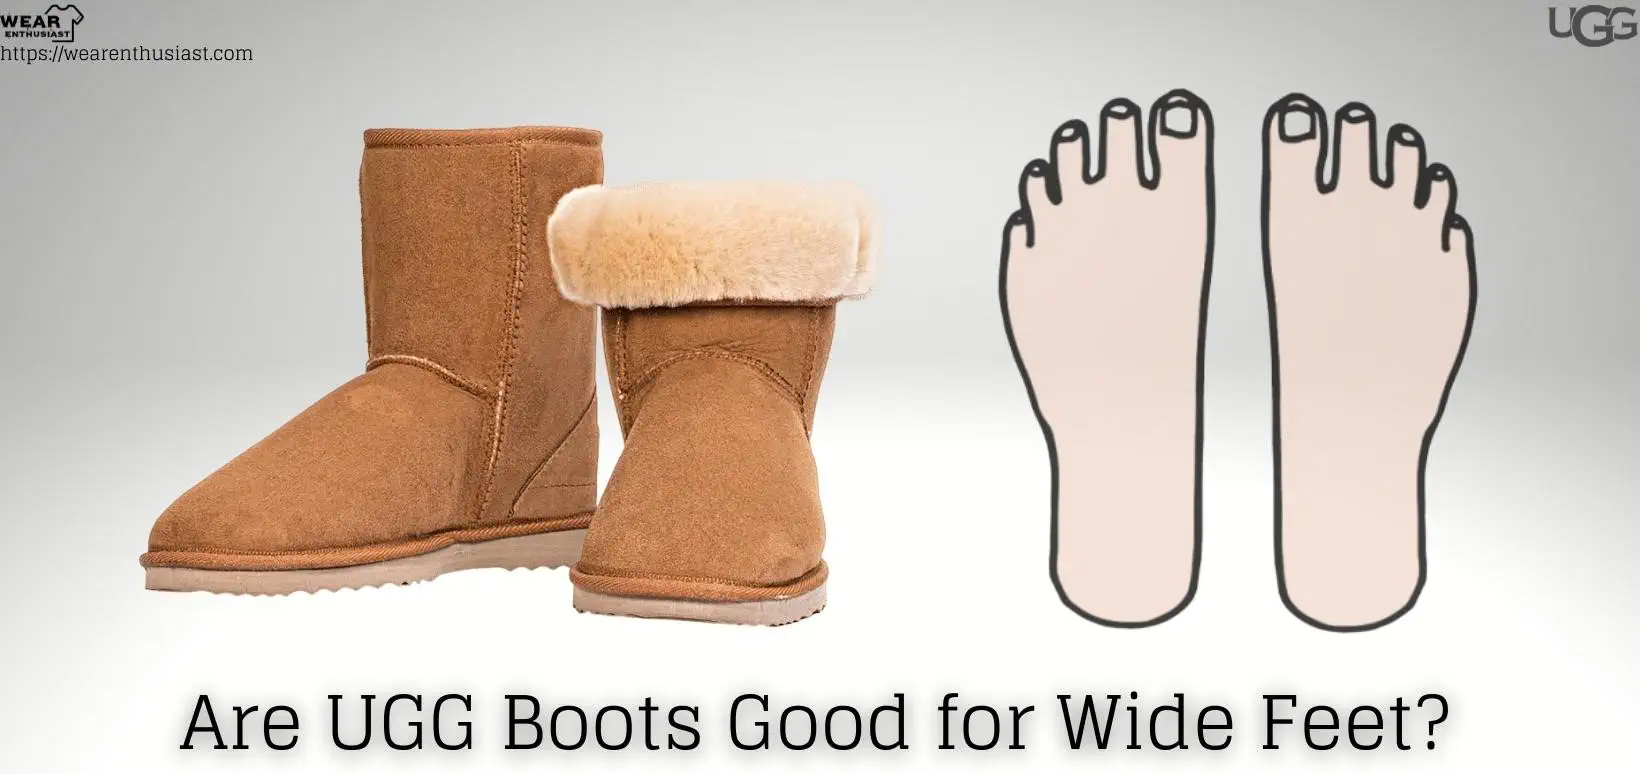 Are UGG Boots Good for Wide Feet?